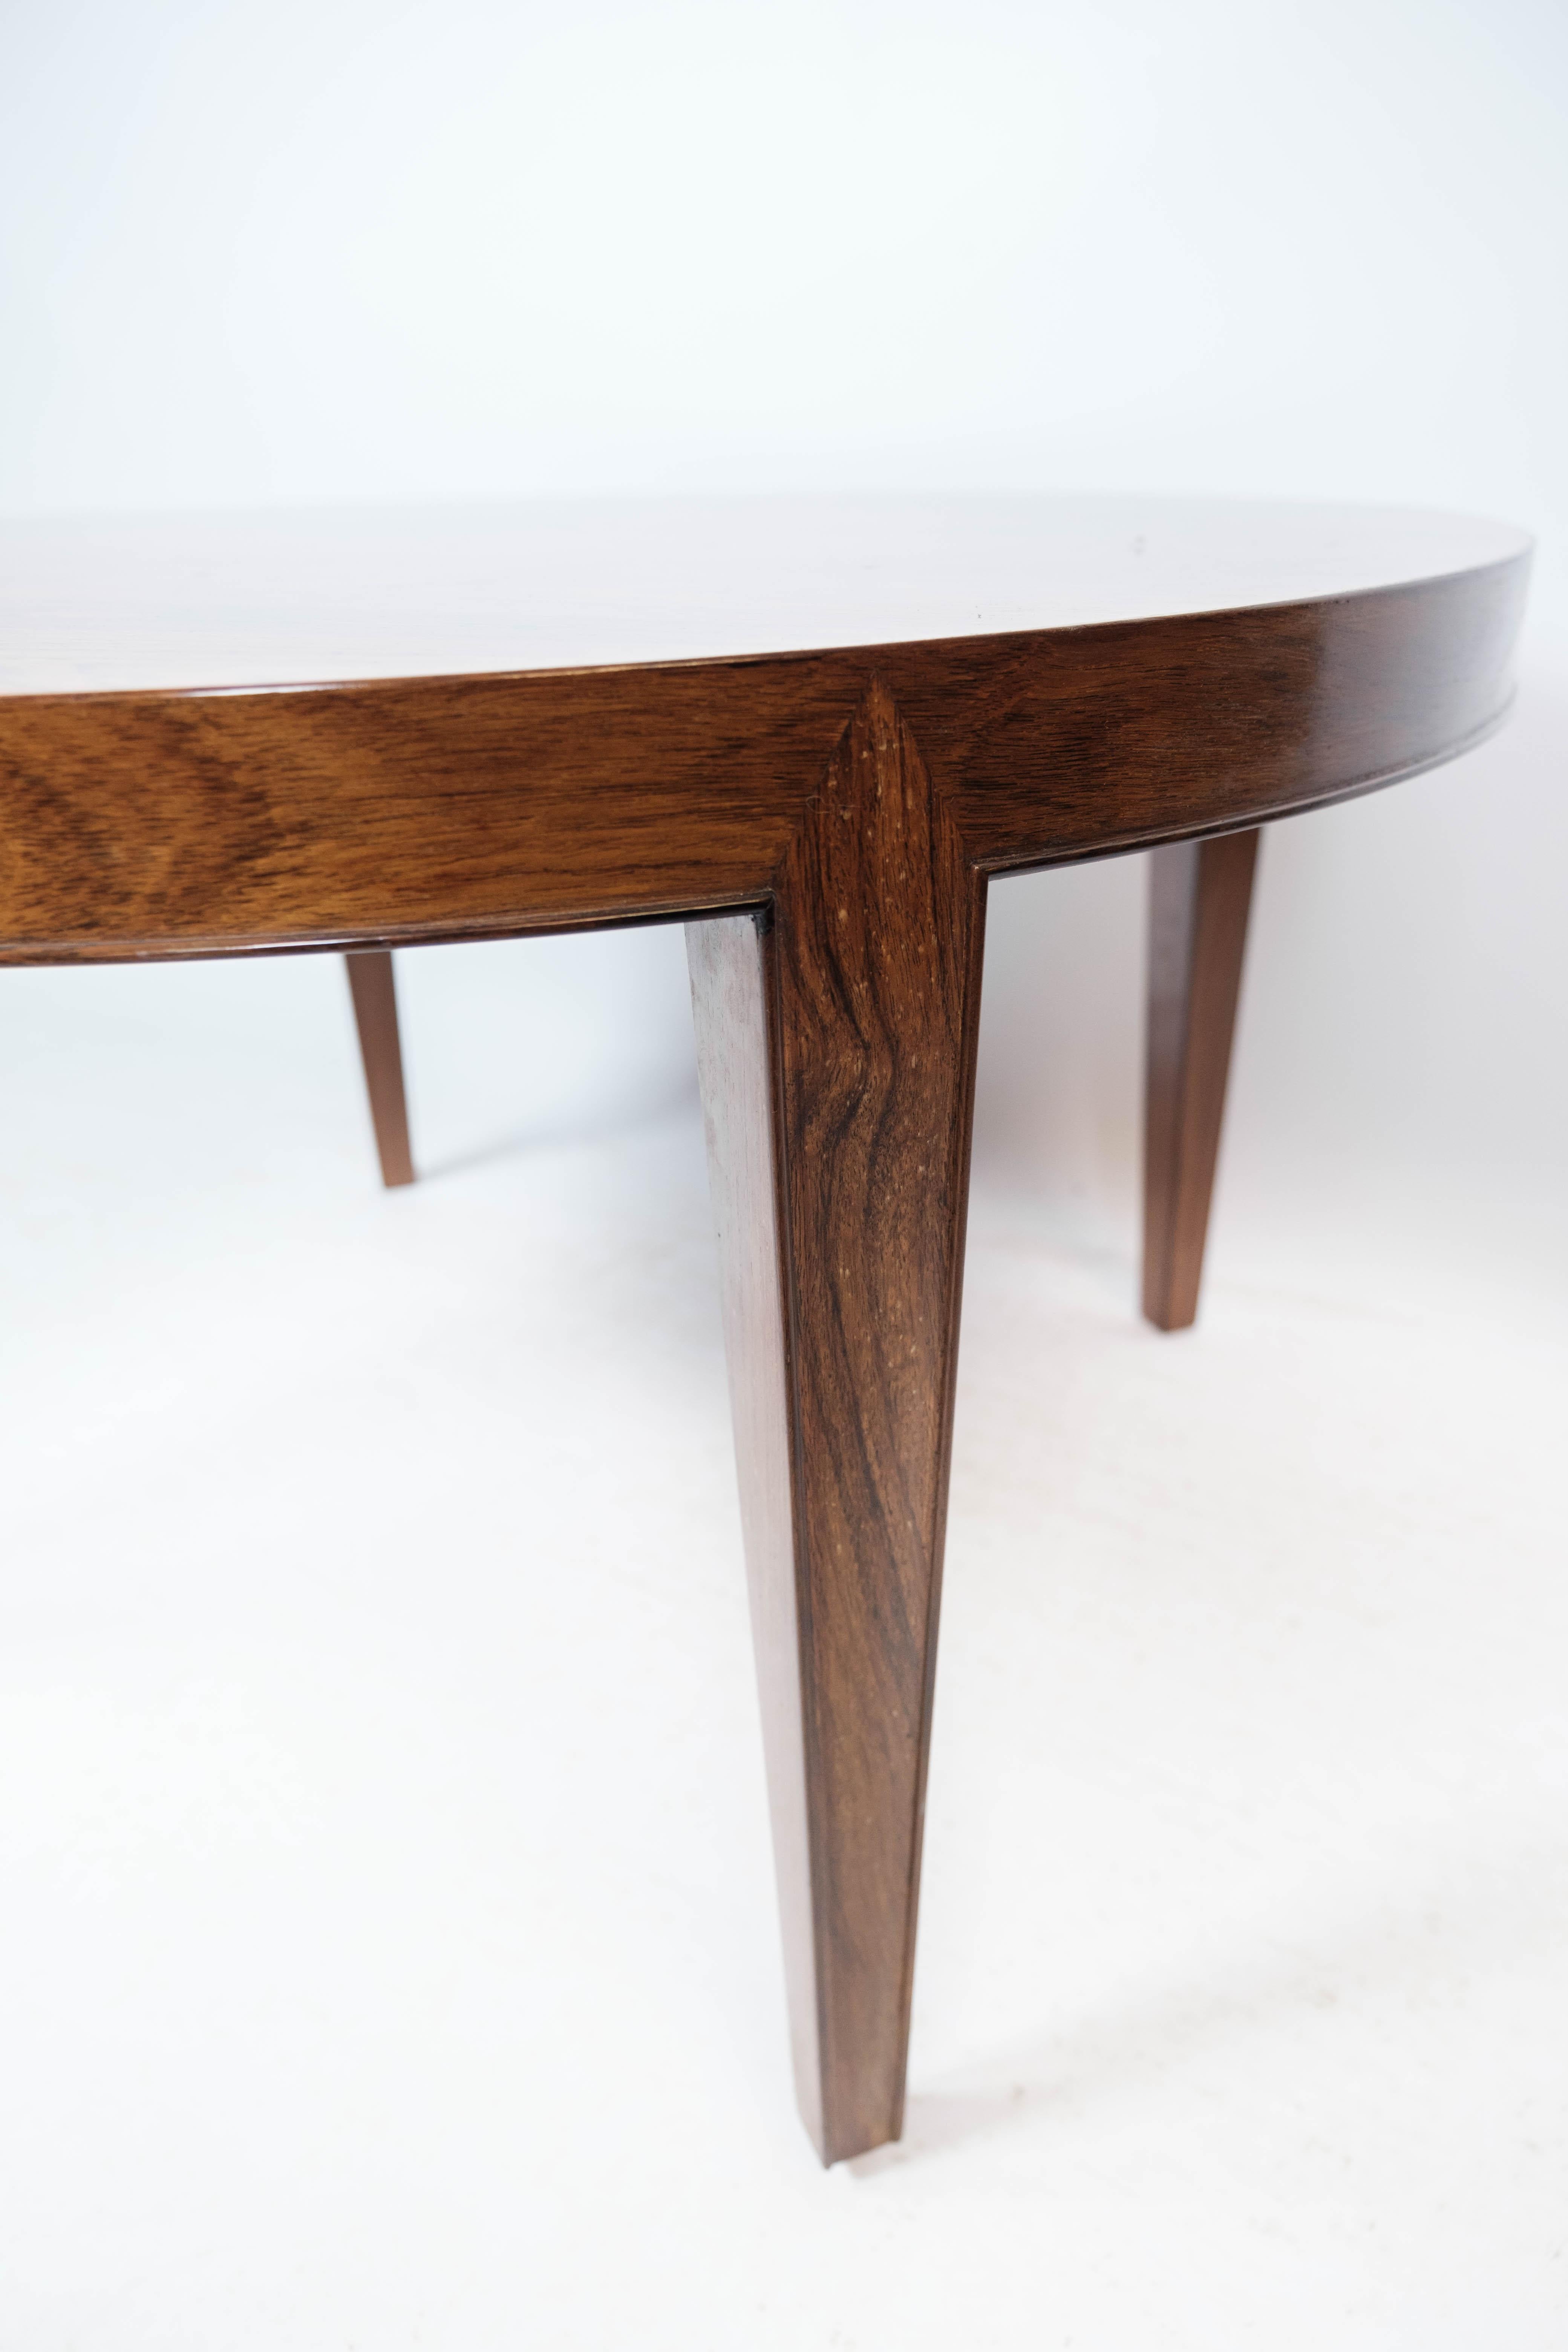 Mid-20th Century Coffee Table Made In Rosewood By Severin Hansen Made By Haslev Møbel From 1960s For Sale